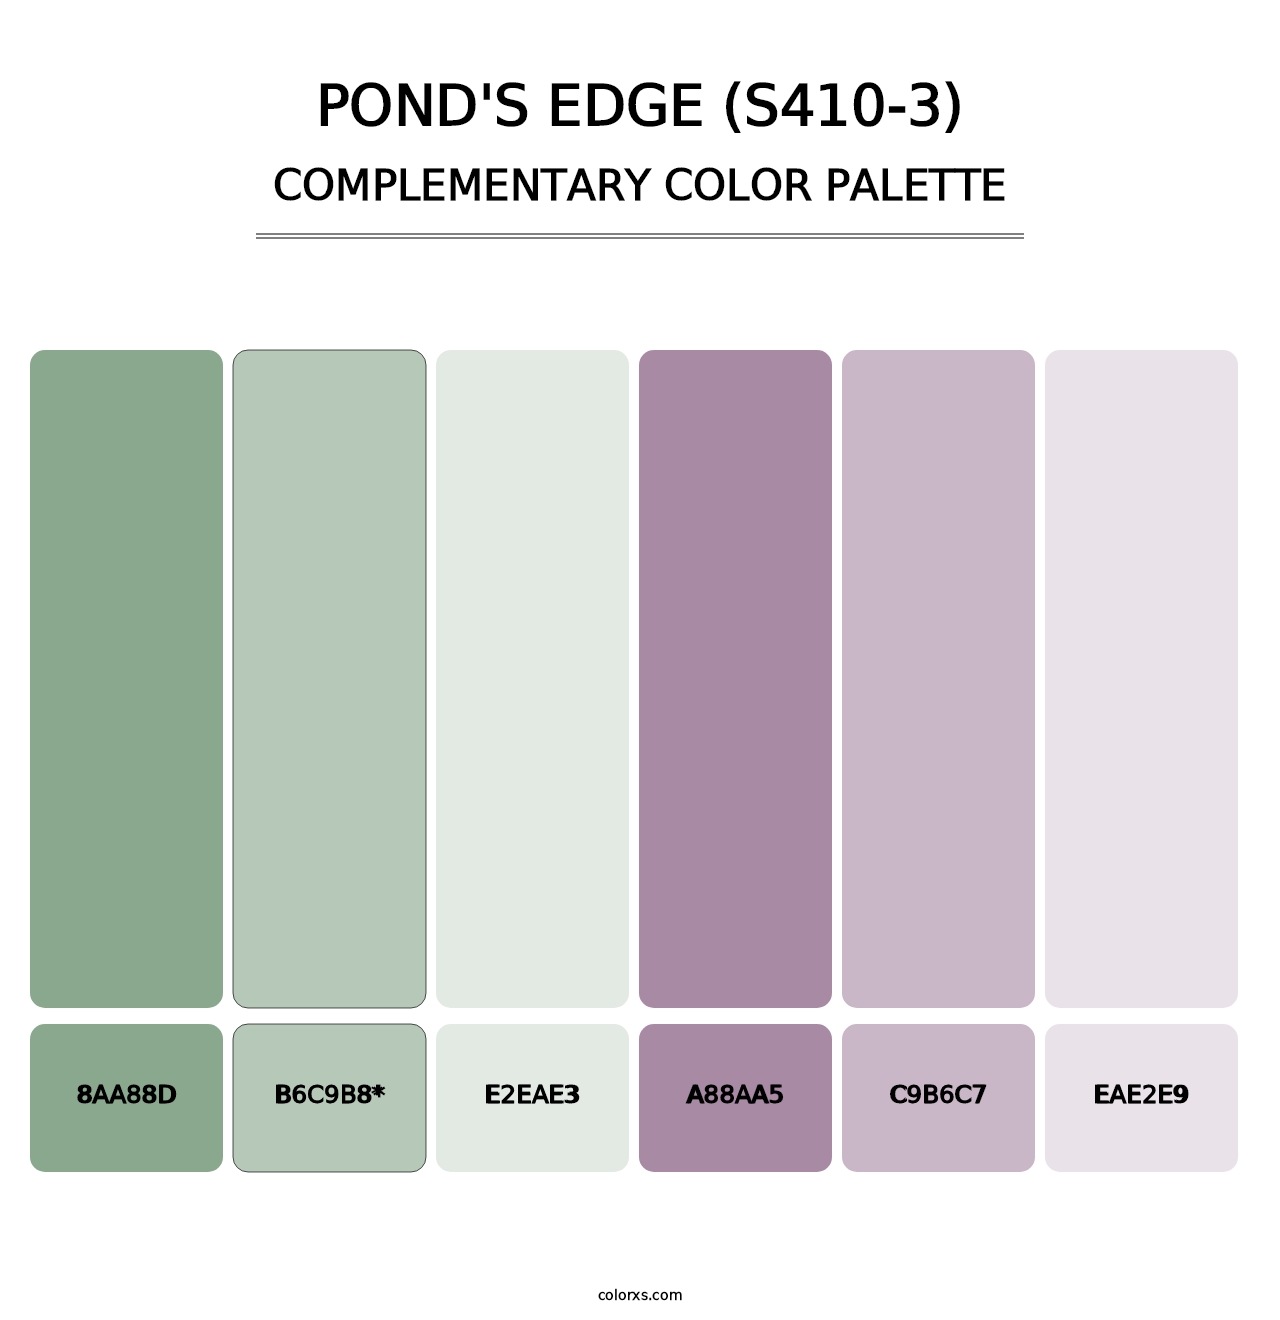 Pond'S Edge (S410-3) - Complementary Color Palette